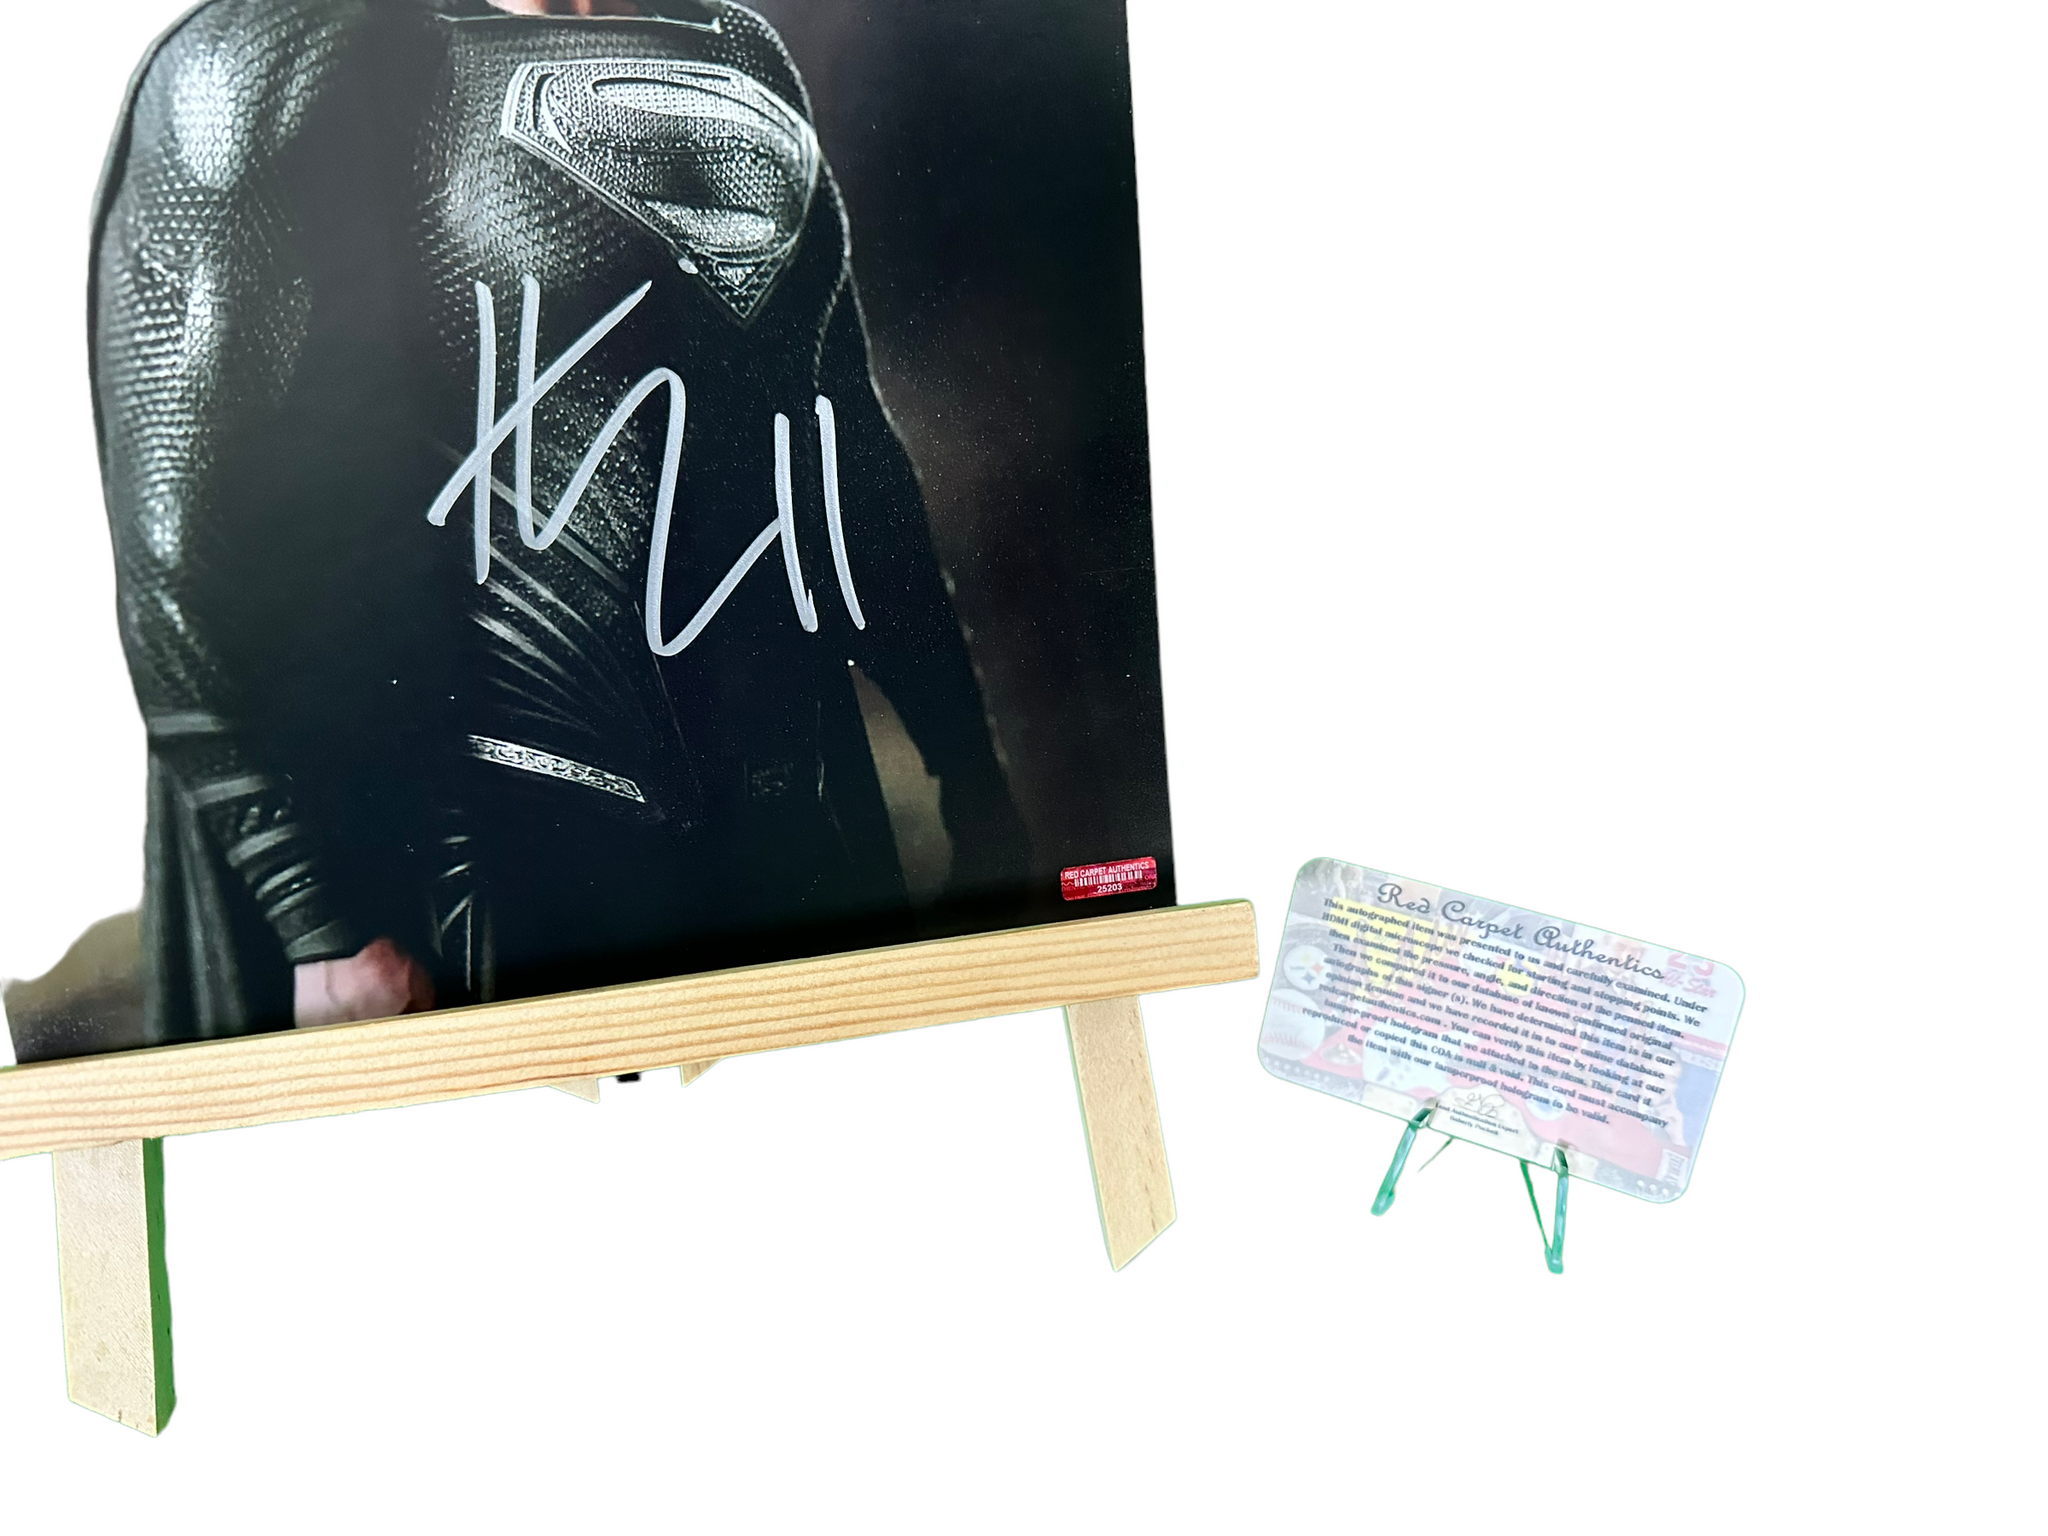 Superman Man of Steel Henry Cavill reprint signed photo #2 RP at 's  Entertainment Collectibles Store